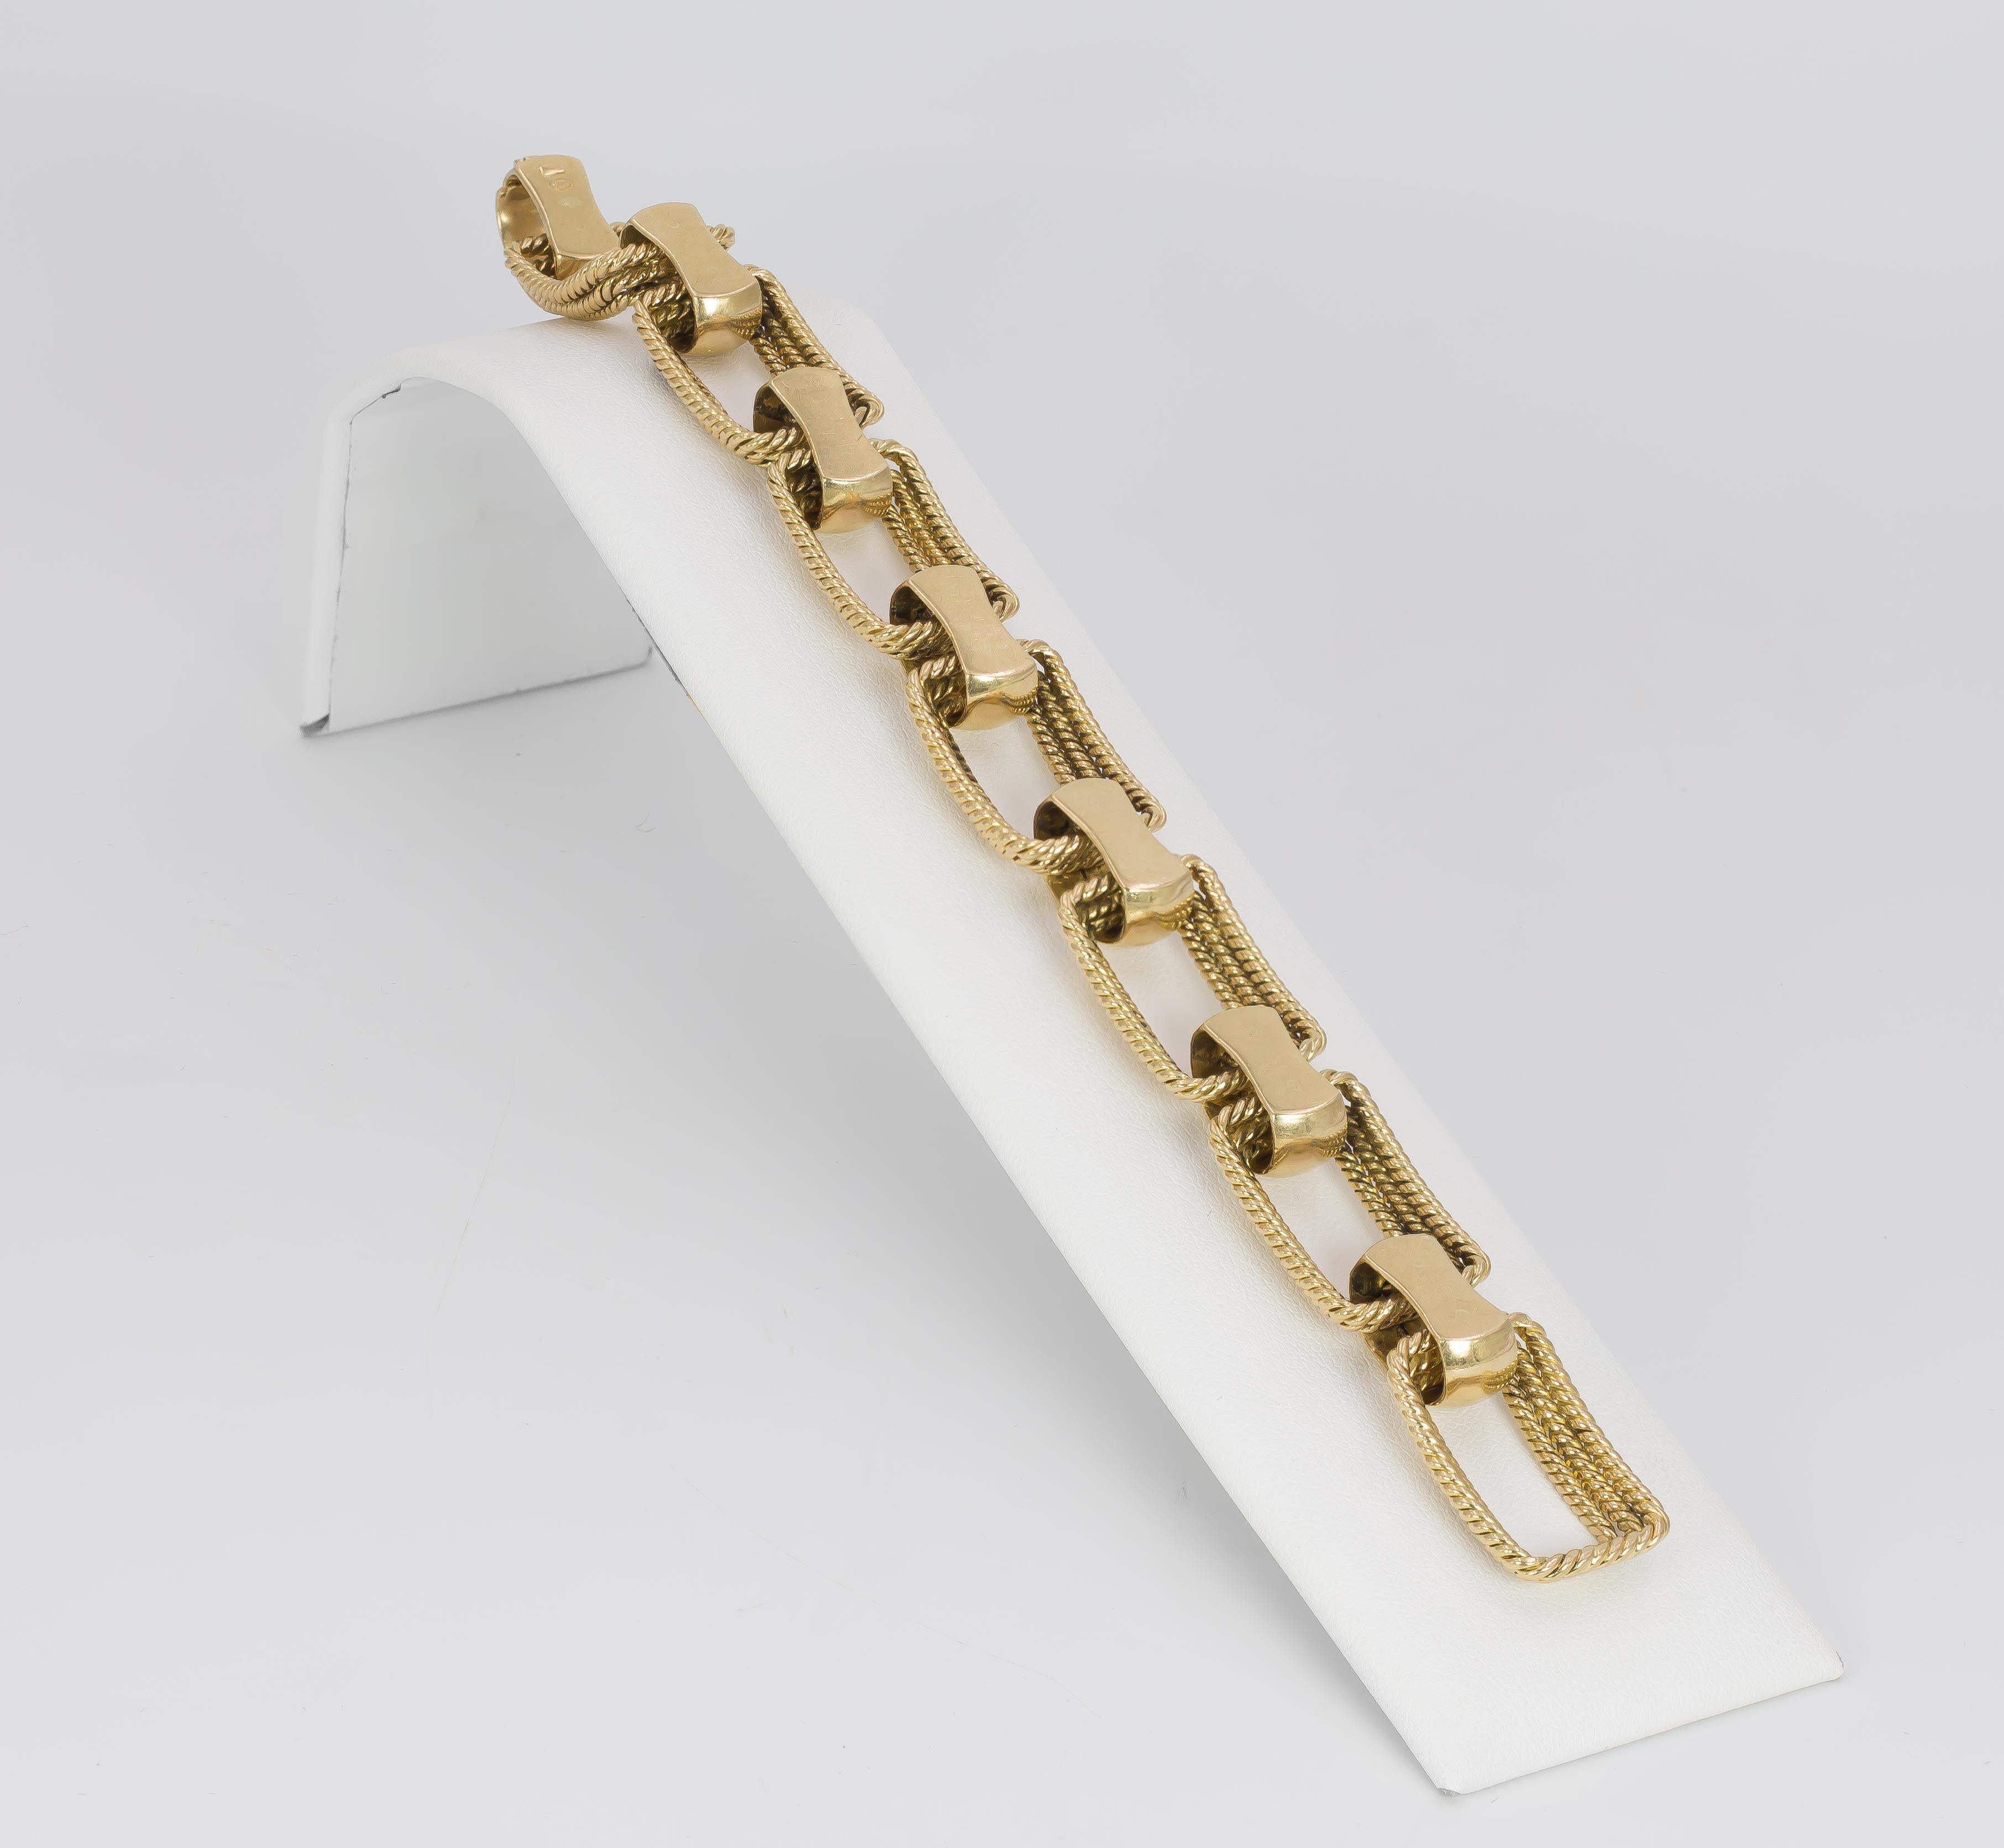 This very elegant antique link bracelet, dating from the 1940s, is set with seven rectangular sections, each one linked to each other by a gold chain. The bracelet is modlled in 18K gold throughout.  

MATERIALS
18K gold

DIMENSIONS
Length: 19